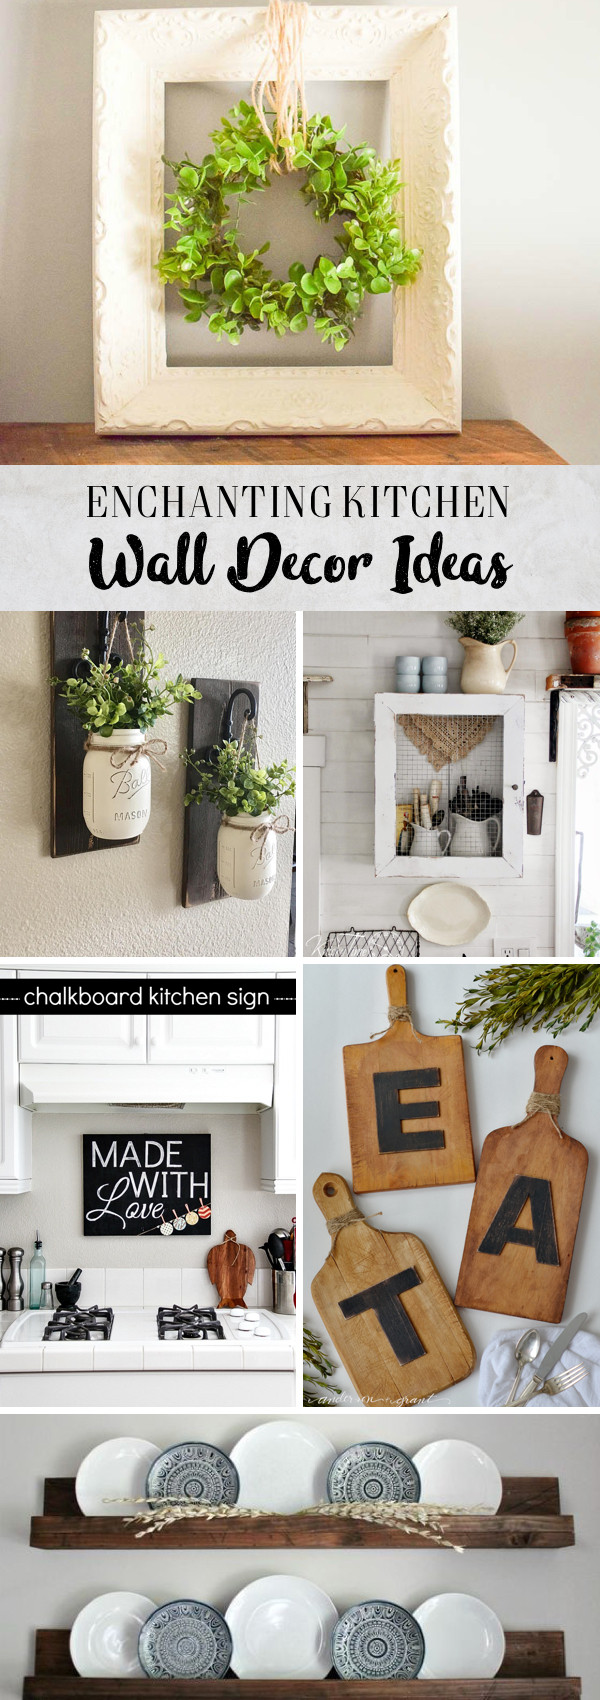 Wall Art Kitchen
 30 Enchanting Kitchen Wall Decor Ideas That are Oozing